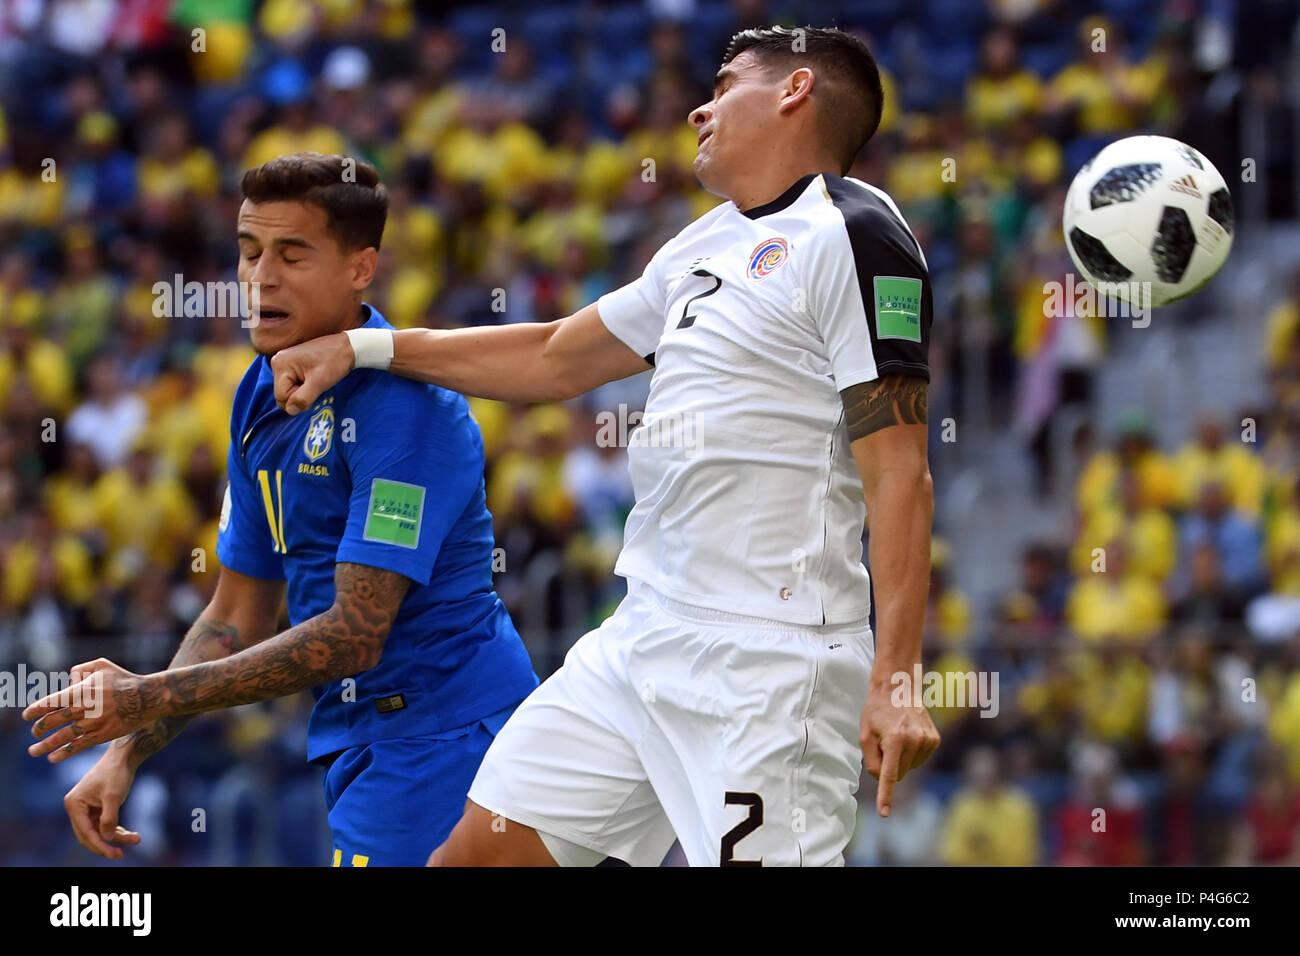 Saint Petersburg, Russia. 22nd June, 2018. Soccer: Preliminary round, Group E, 2nd matchday: Brazil vs Costa Rica in the St. Petersburg Stadium: Costa Rica's Johnny Acosta (R) and Brazil's Philippe Coutinho in action. Credit: Federico Gambarini/dpa/Alamy Live News Stock Photo